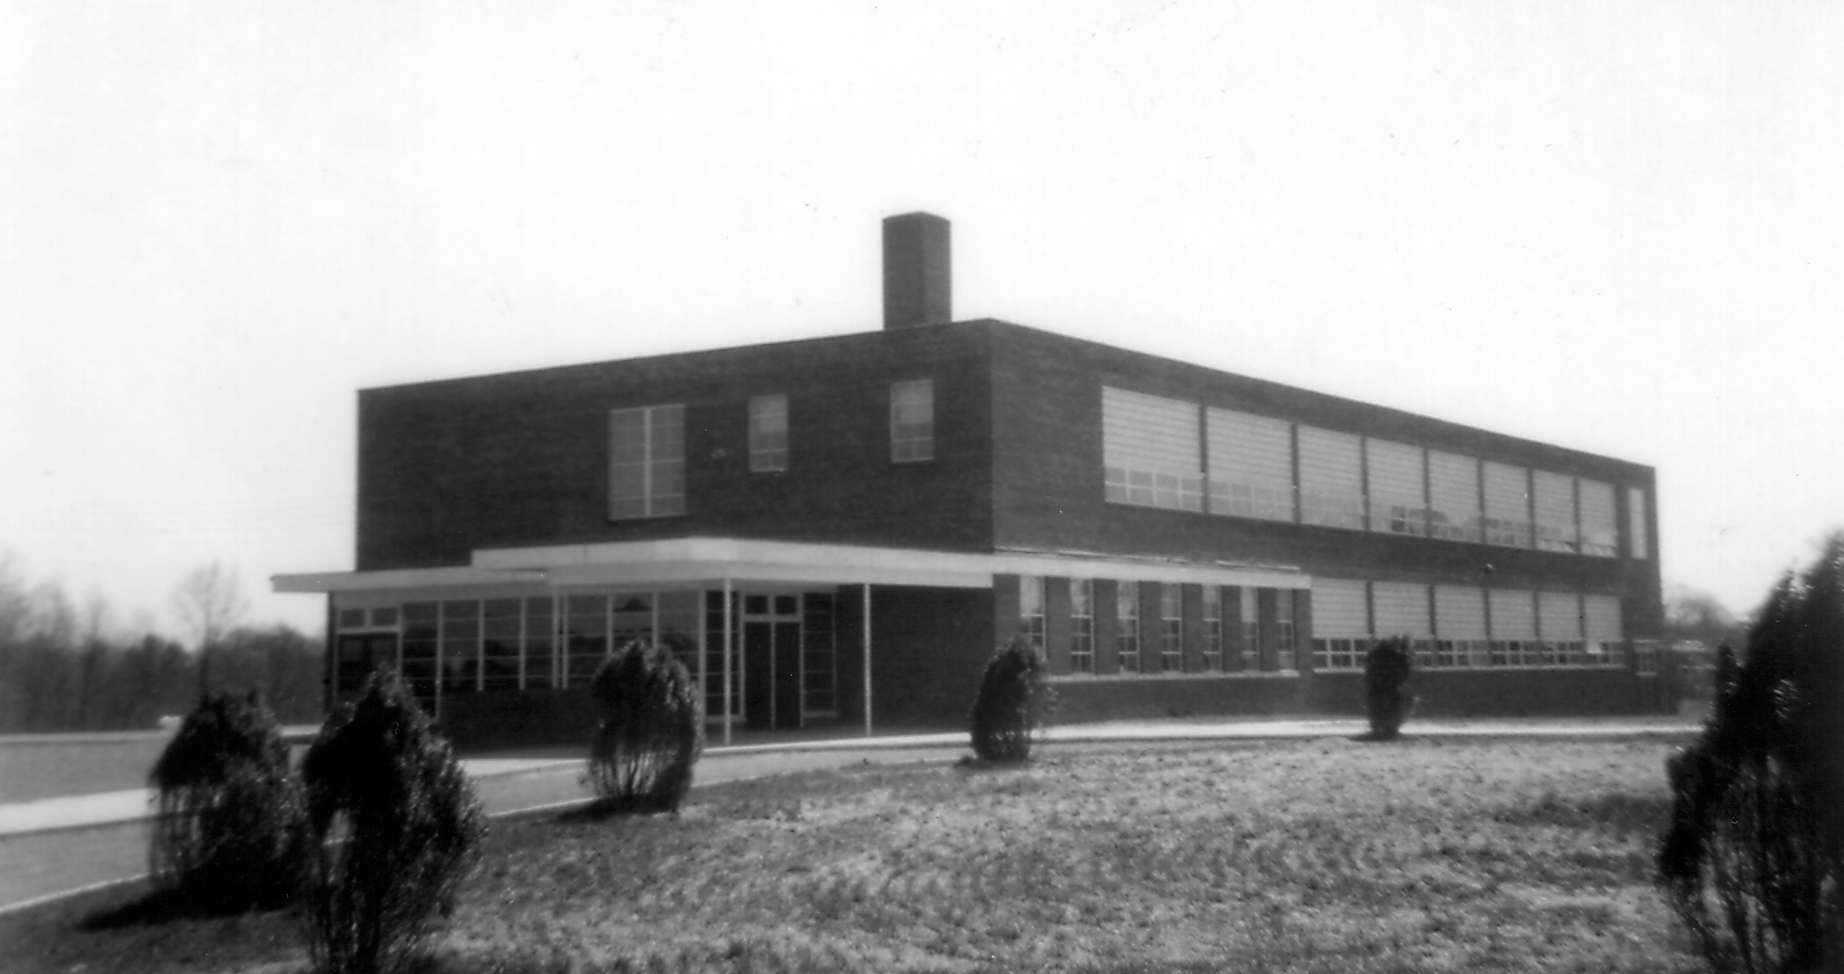 Black and white photograph of the front exterior of Forestville Elementary School taken in 1954. The building is a two-story brick structure with classrooms on both sides of the building separated by central hallways. The main office is located on the first floor near the main entrance. The main entrance, a set of double doors surrounded by windows, is covered by a metal awning. A circular driveway curves in front of the building. In the center of the circle is a grassy area where several trees or tall shrubs have been planted.